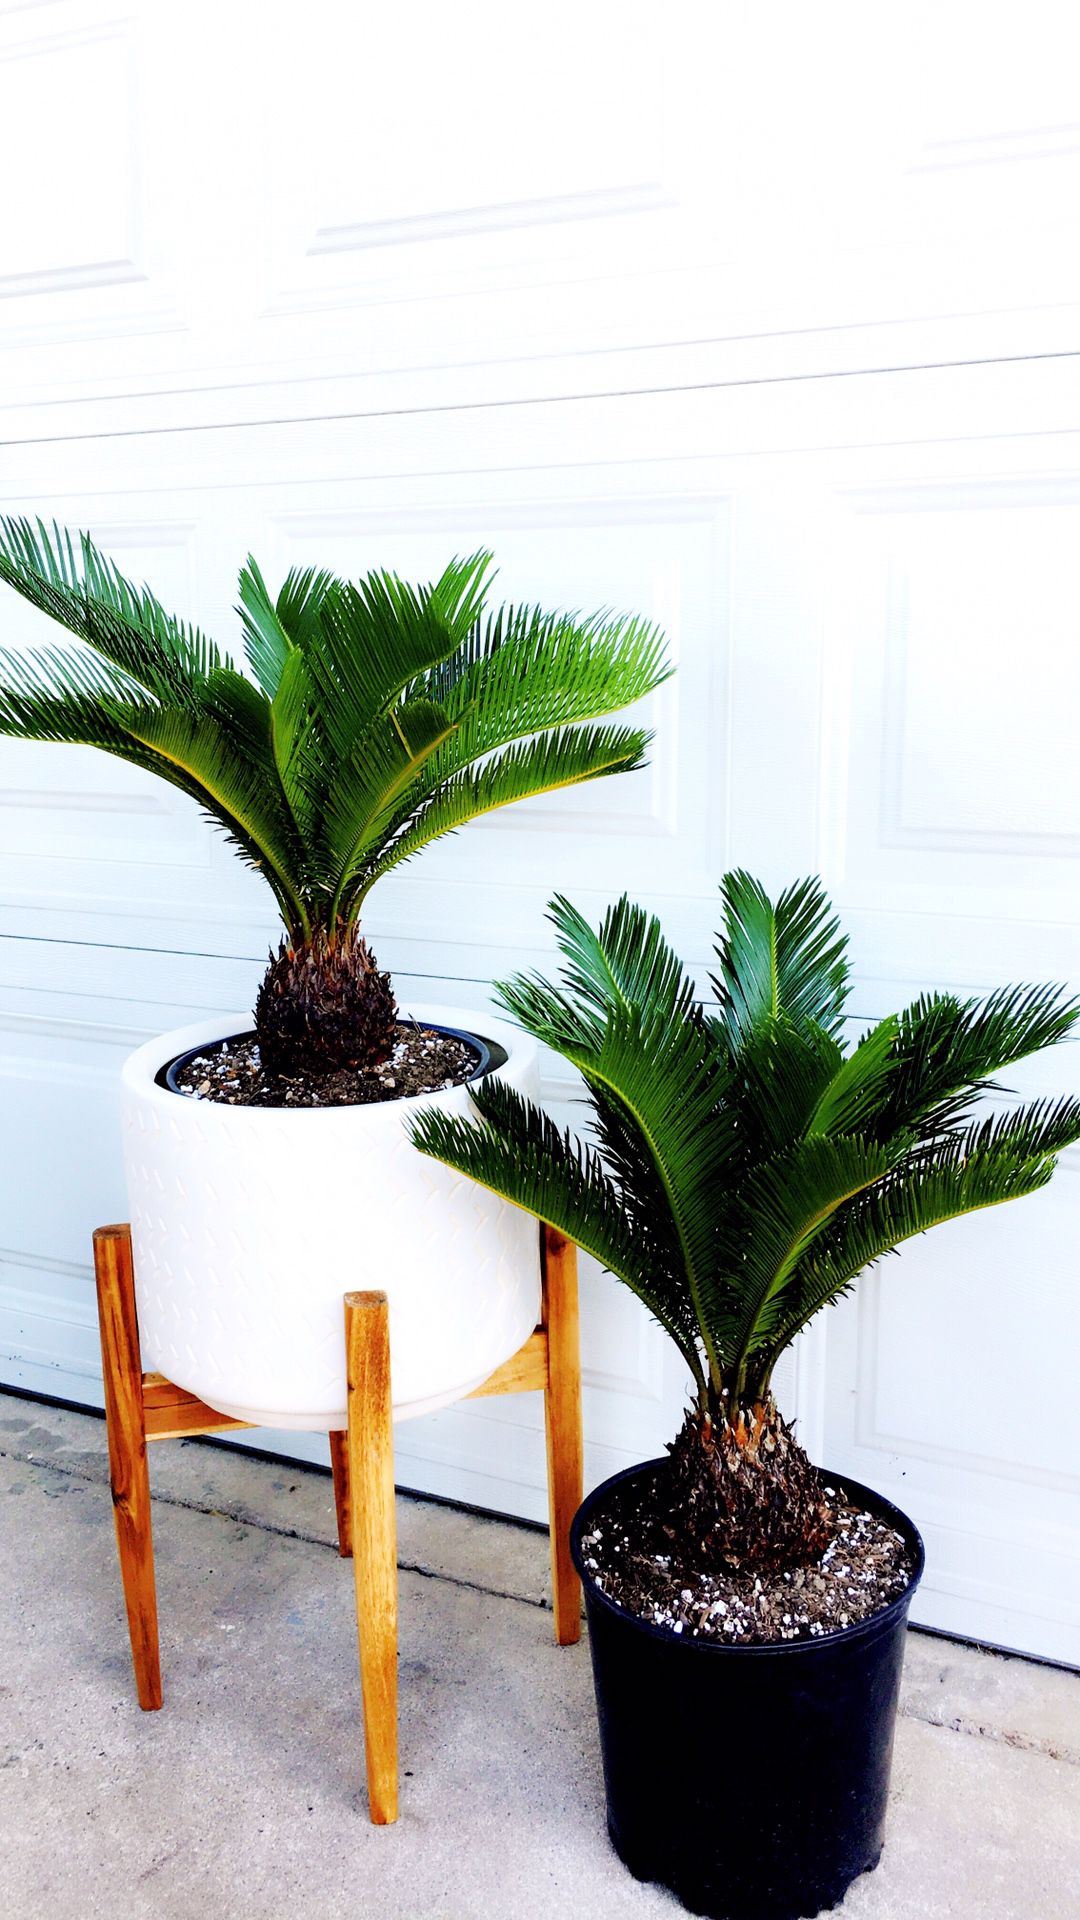 PLANT only - PLANTER IS NOT INCLUDED - SAGO PALM - Short and Solf Leaves - Good for Bonsai or Home Decorative Plant - $20 each - 6 available